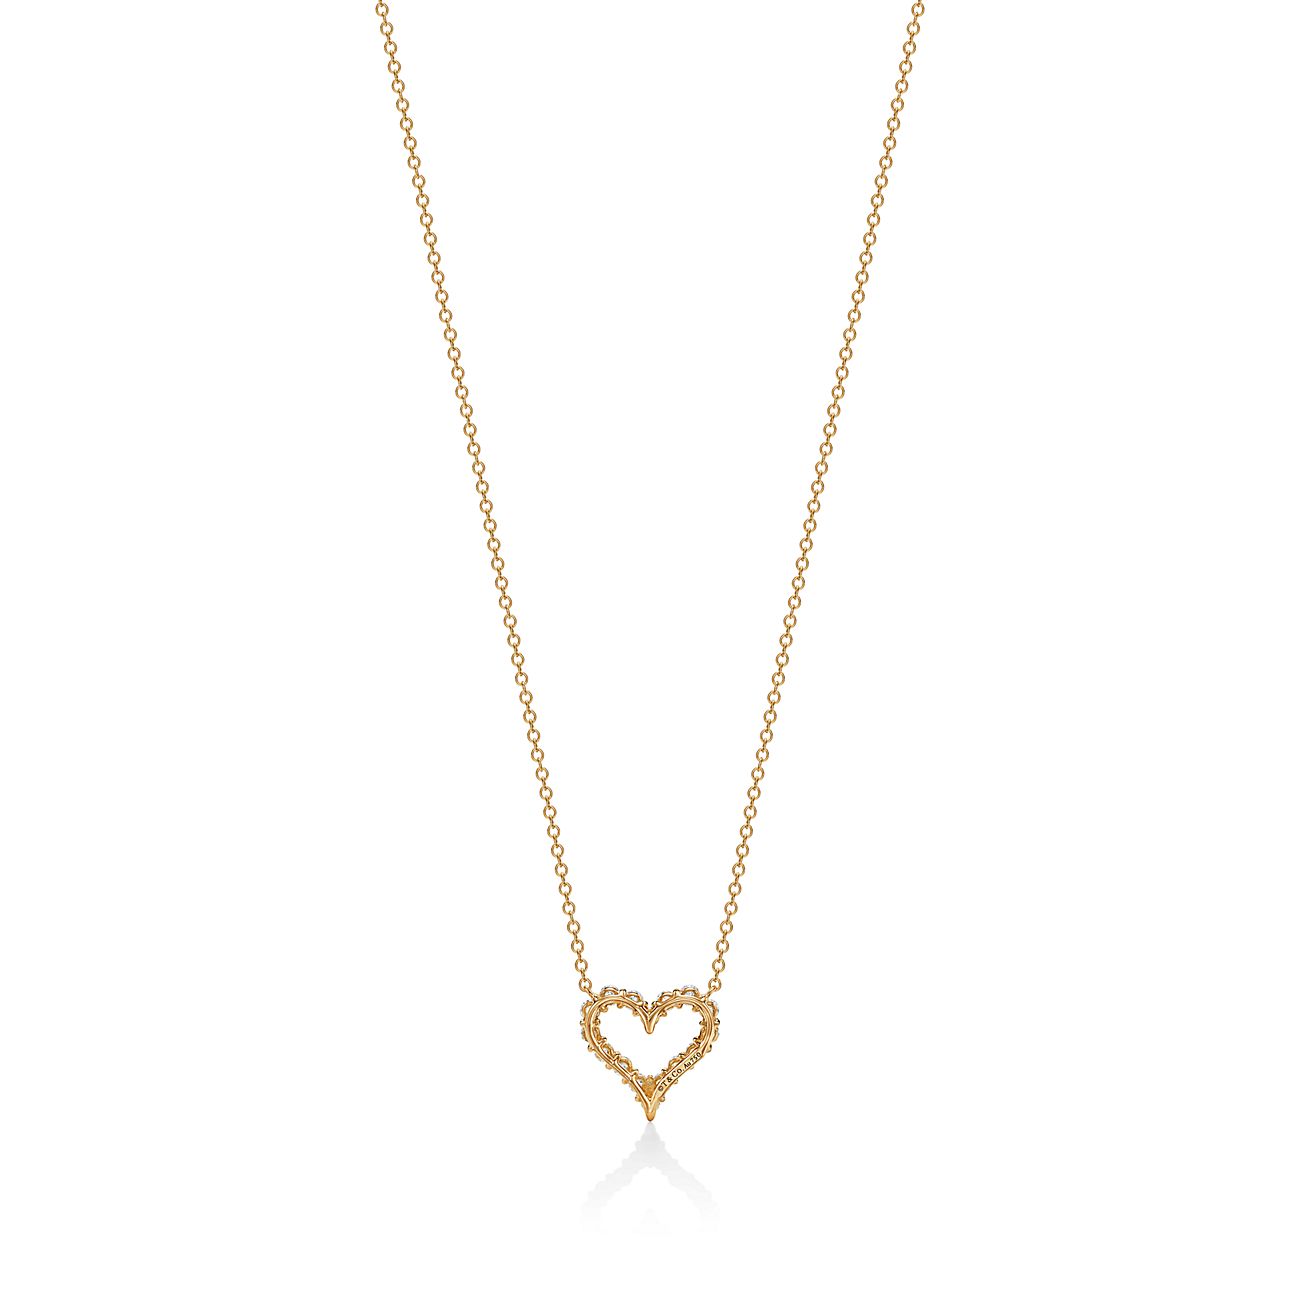 Buy Gold-Toned Necklaces & Pendants for Women by JUICY COUTURE Online |  Ajio.com